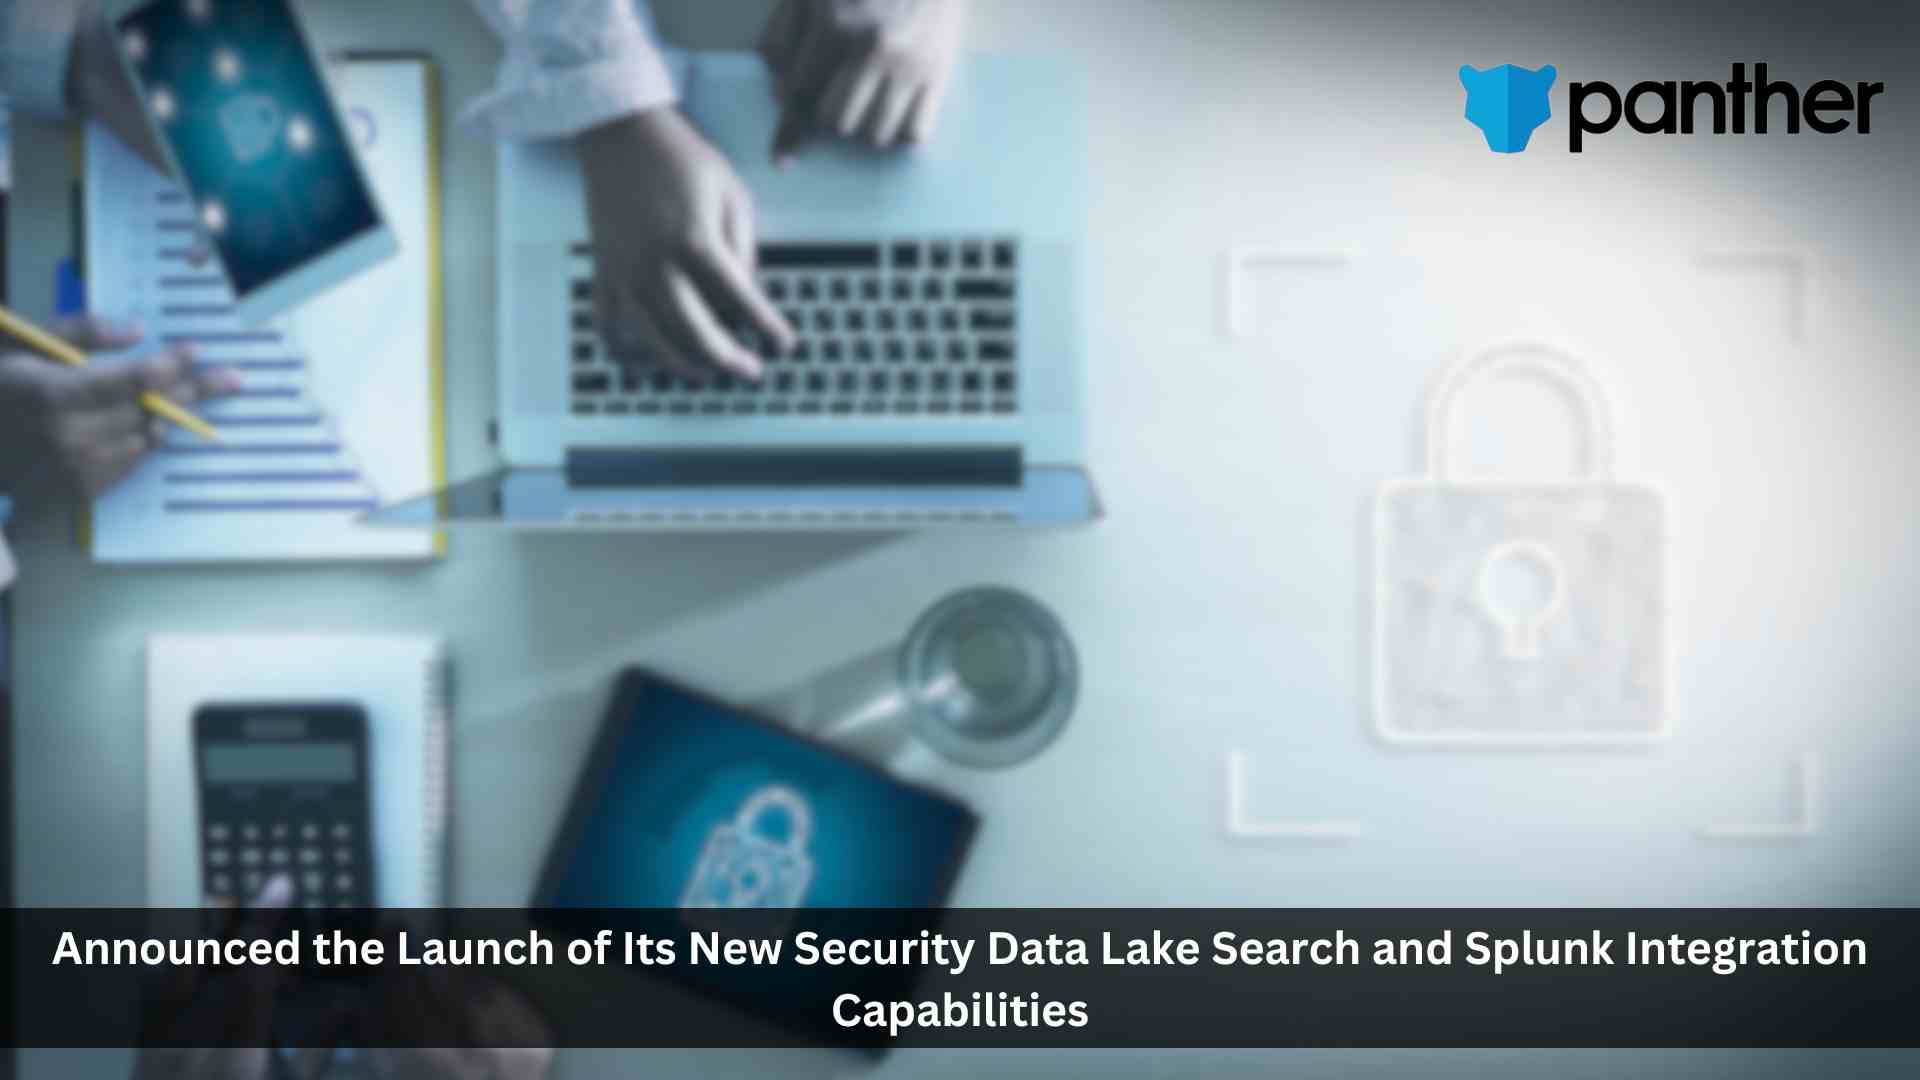 Panther Unveils Security Data Lake Search and Splunk Integration to Redefine Detection and Response at Scale